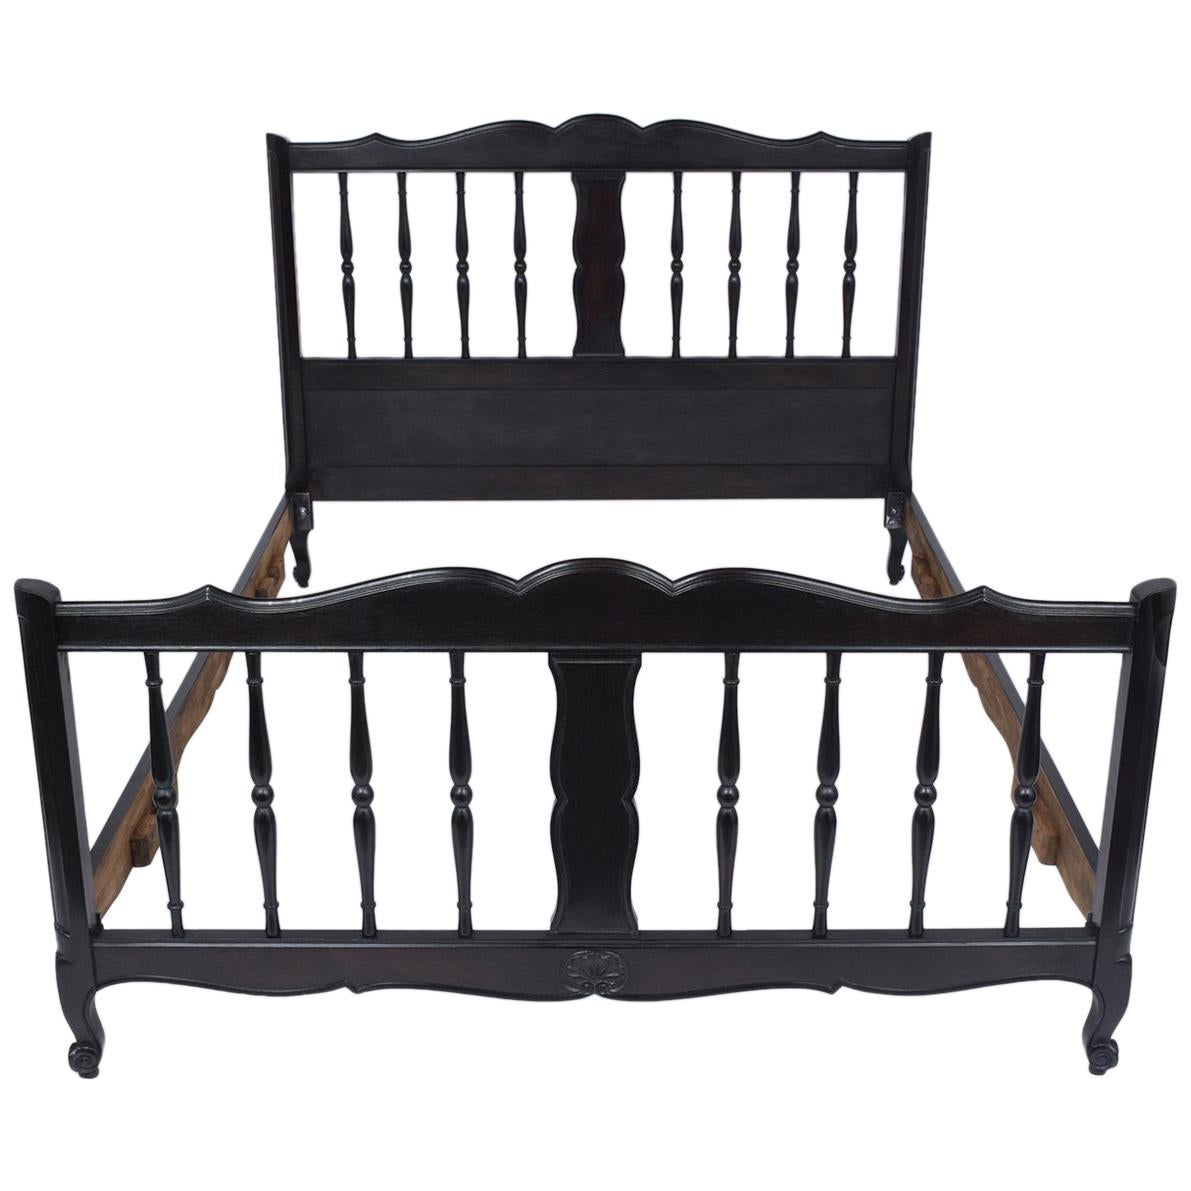 This French Provincial full-size bed frame has been completely restored by our expert craftsmen, is made out of walnut wood, and features a newly stained ebonized satin finish. The frame comes with head/footboard and wooden rails, each has beautiful